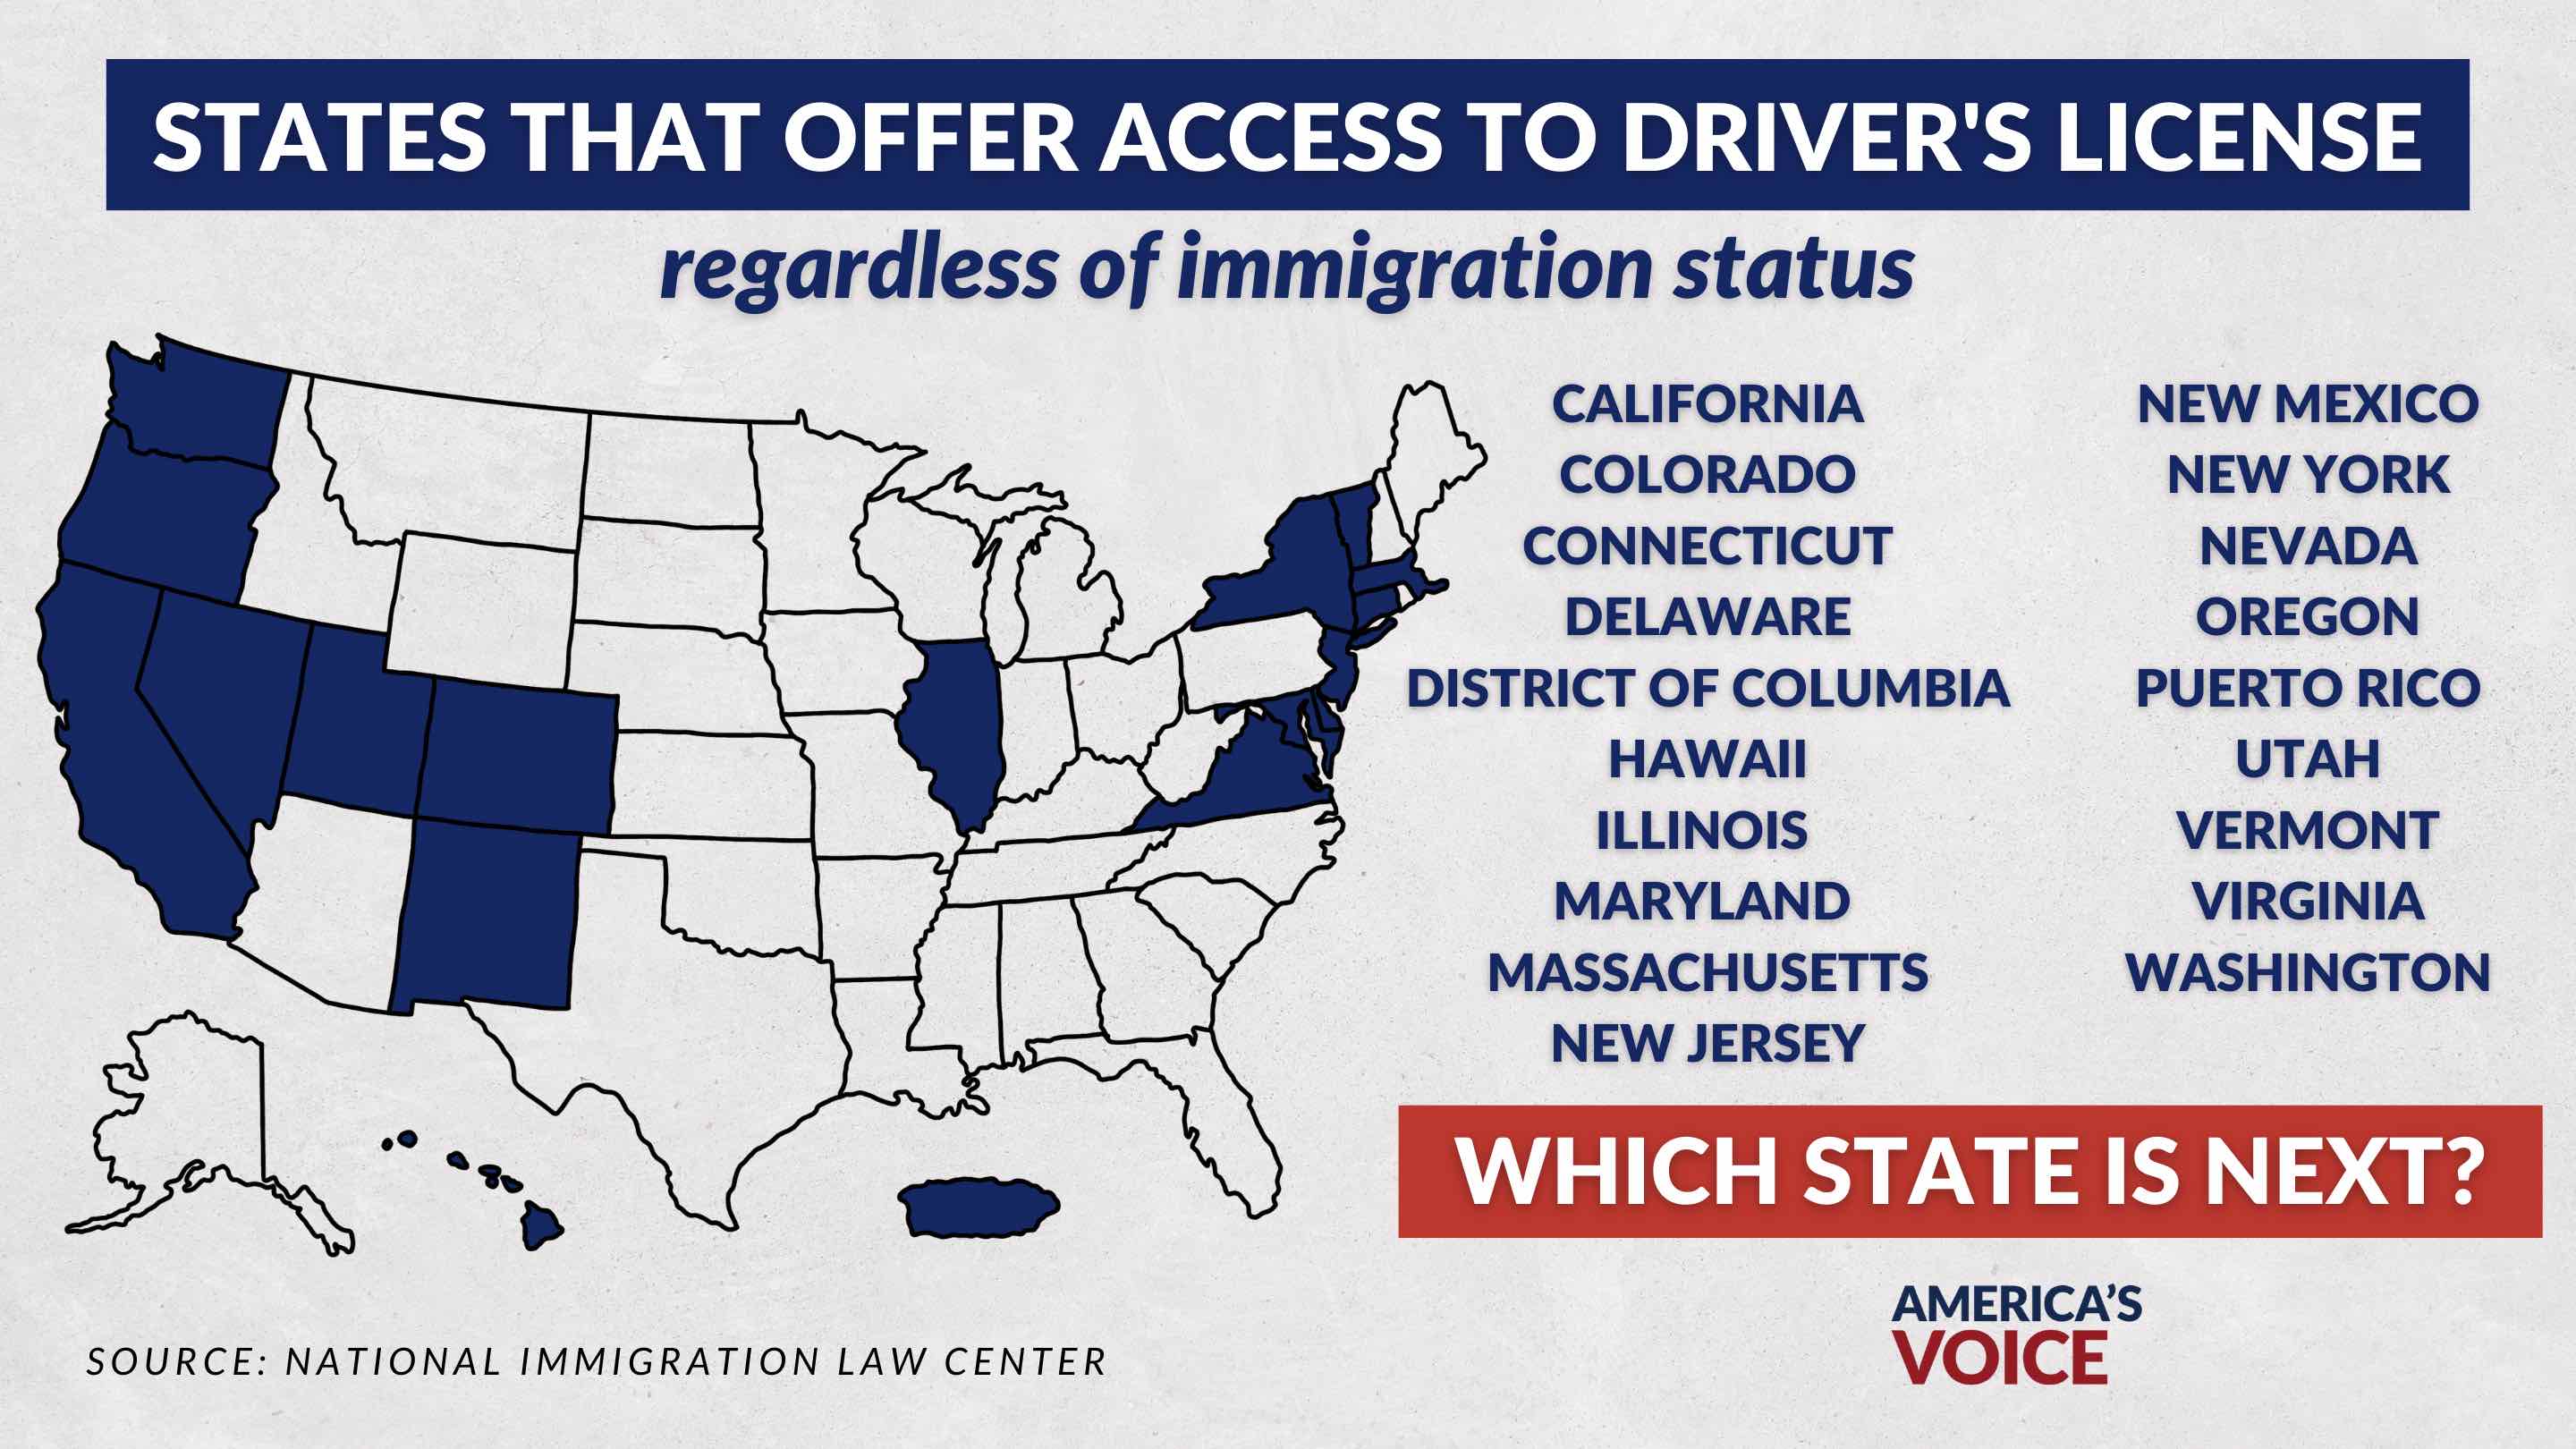 What it will cost to issue drivers licenses to undocumented immigrants in  Mass.